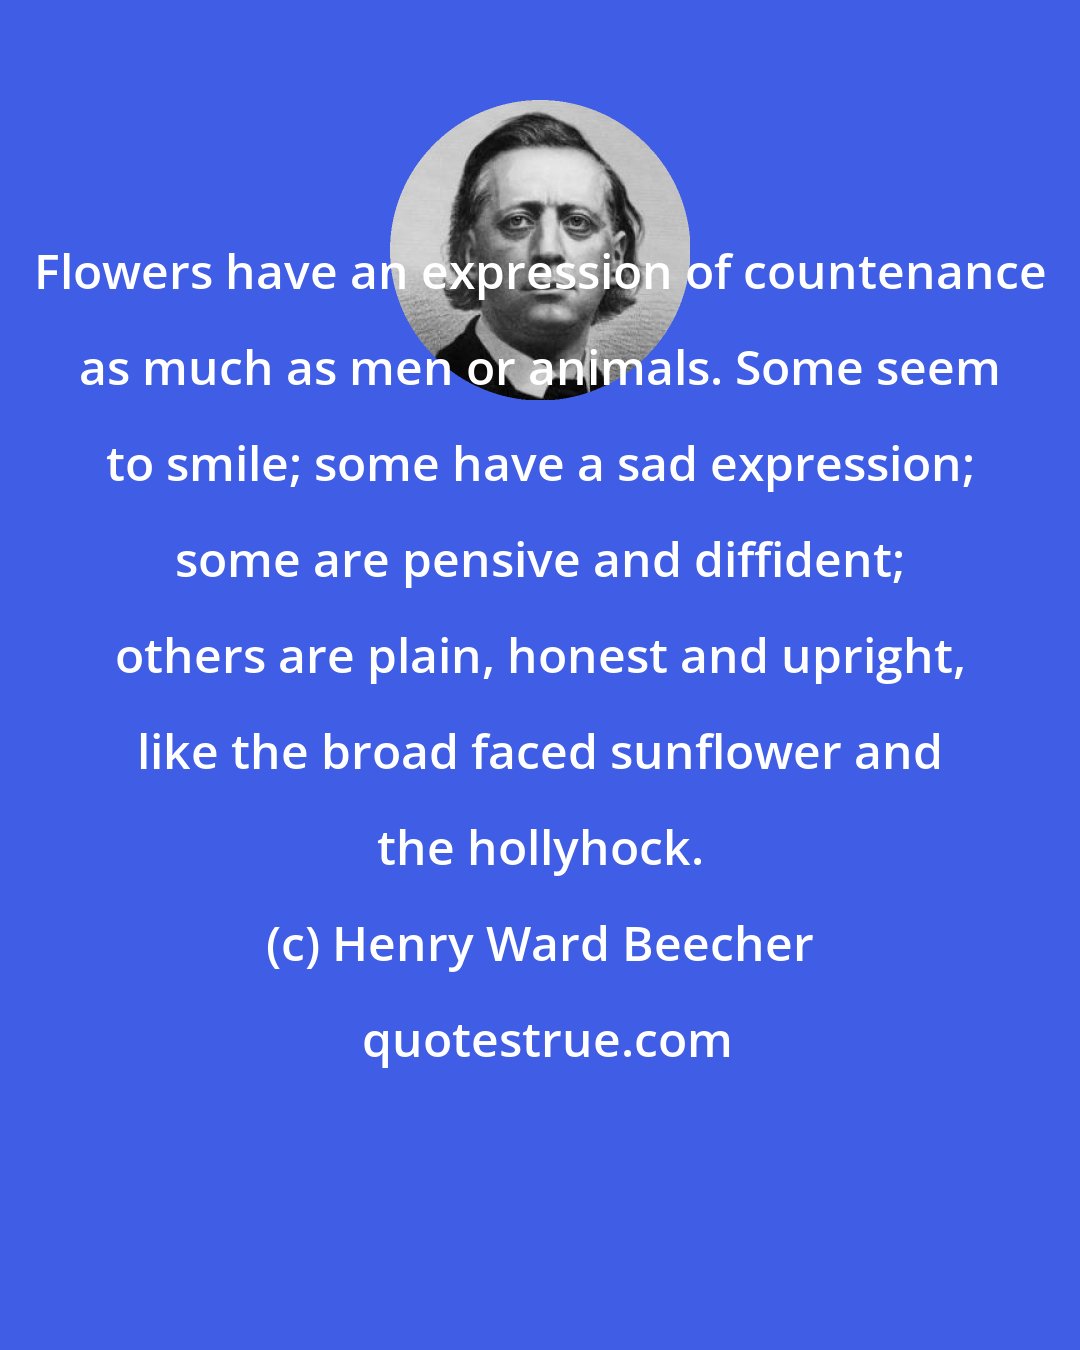 Henry Ward Beecher: Flowers have an expression of countenance as much as men or animals. Some seem to smile; some have a sad expression; some are pensive and diffident; others are plain, honest and upright, like the broad faced sunflower and the hollyhock.